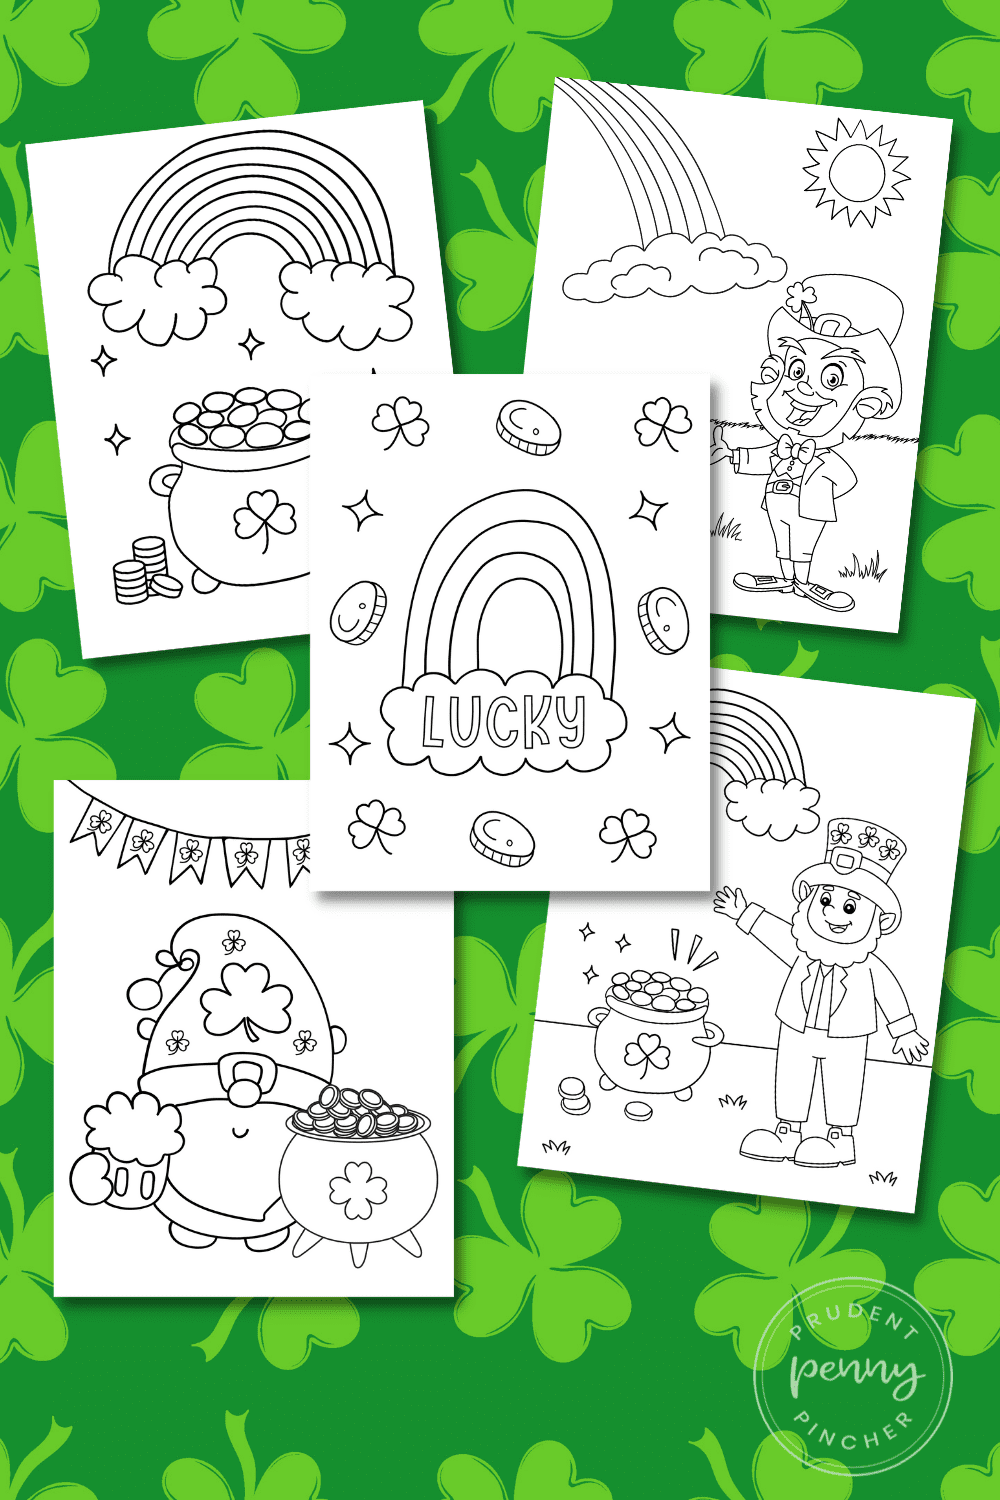 FREE St. Patrick's Day Poster to Decorate Your School Library!